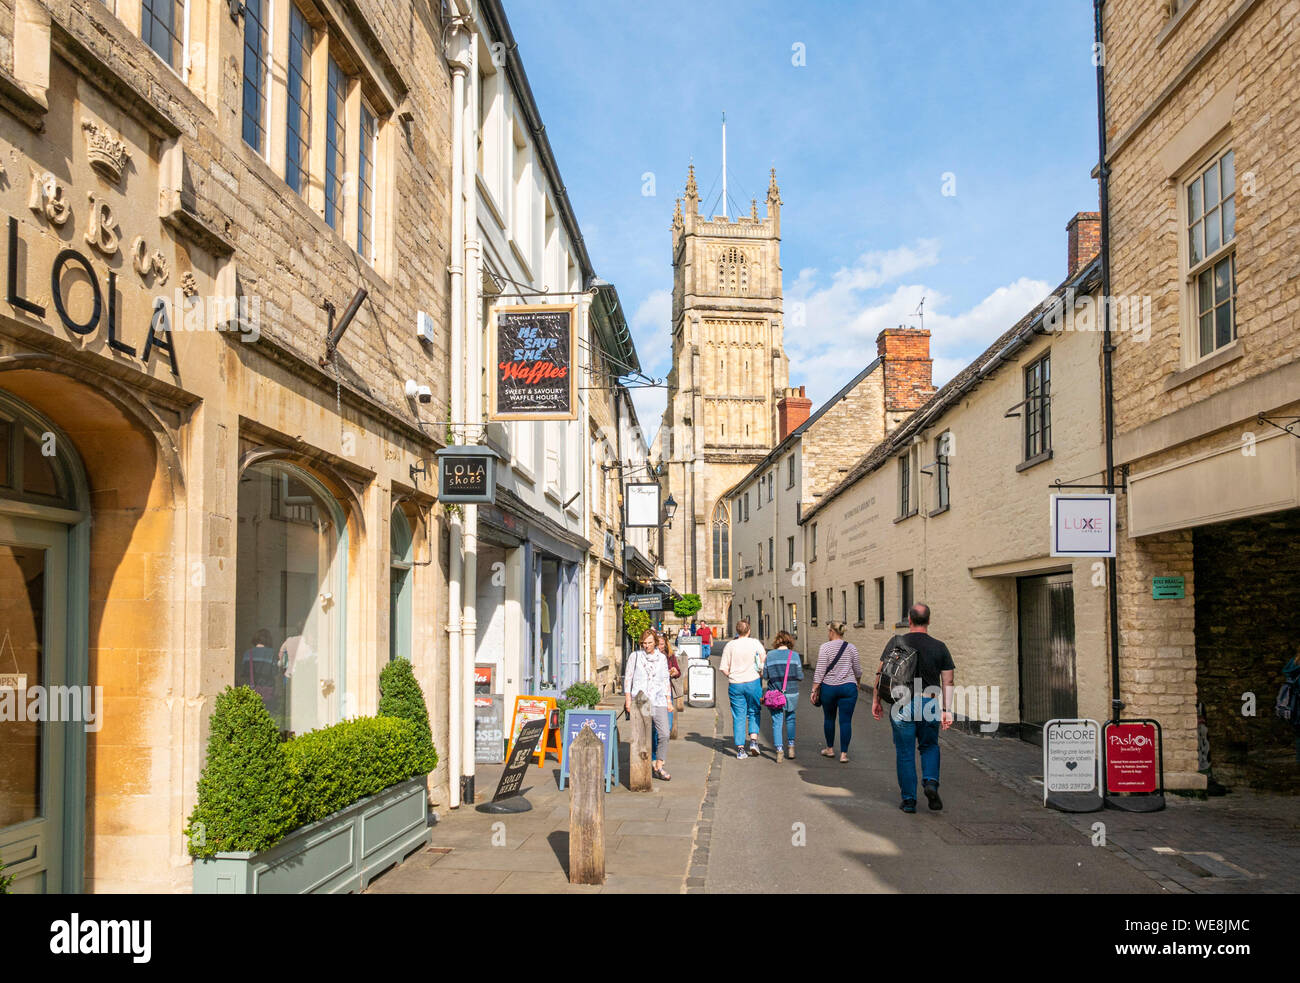 Black jack Street Cirencester and St. John the Baptist church Cirencester town centre Cirencester Wiltshire england uk gb Europe Stock Photo